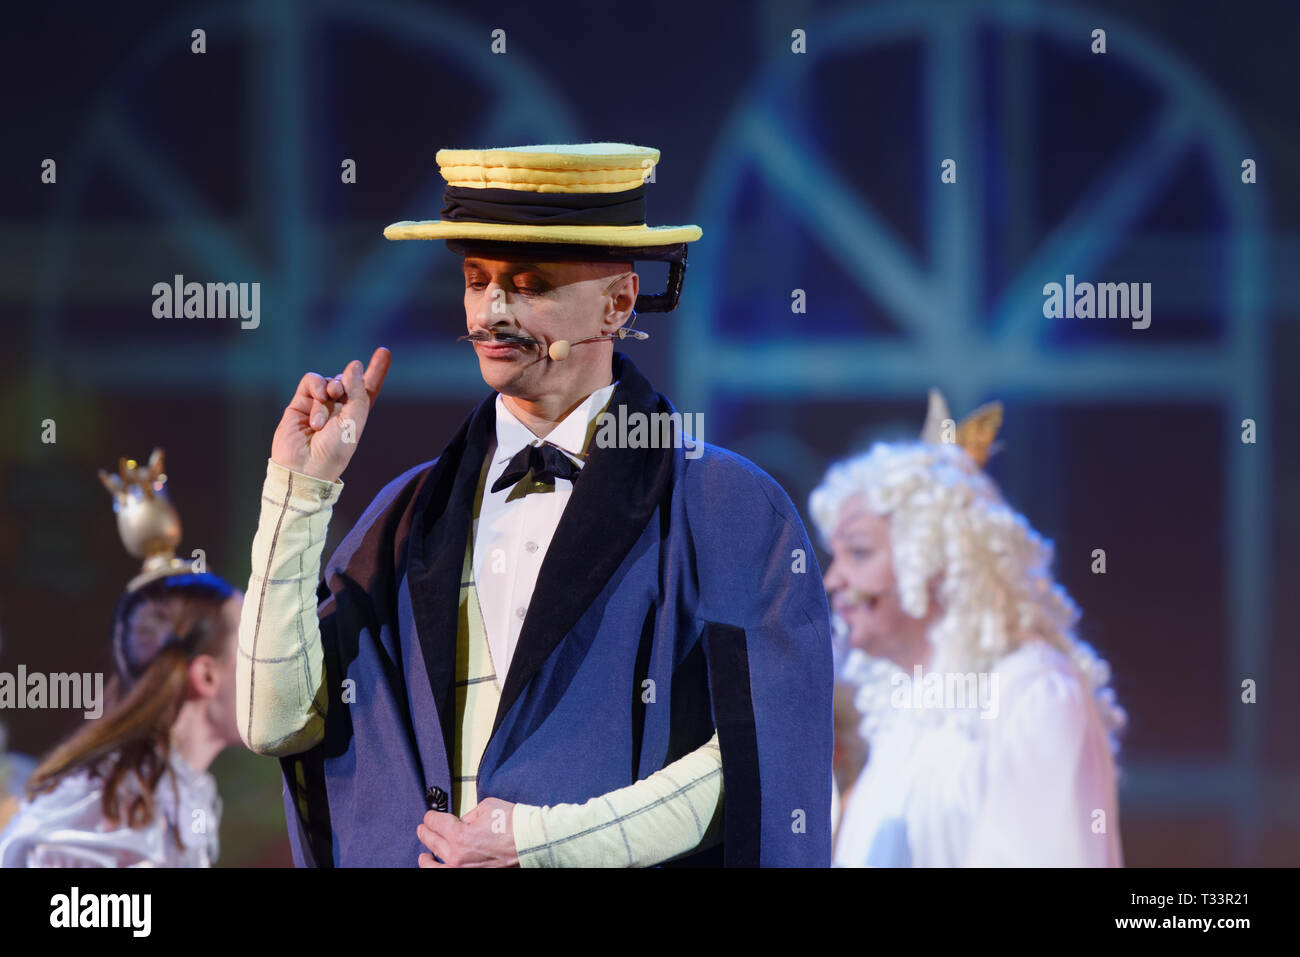 St. Petersburg, Russia - March 25, 2019: Igor Mosyuk as Detective in the musical Town Musicians of Bremen during its press preview in Saint-Petersburg Stock Photo